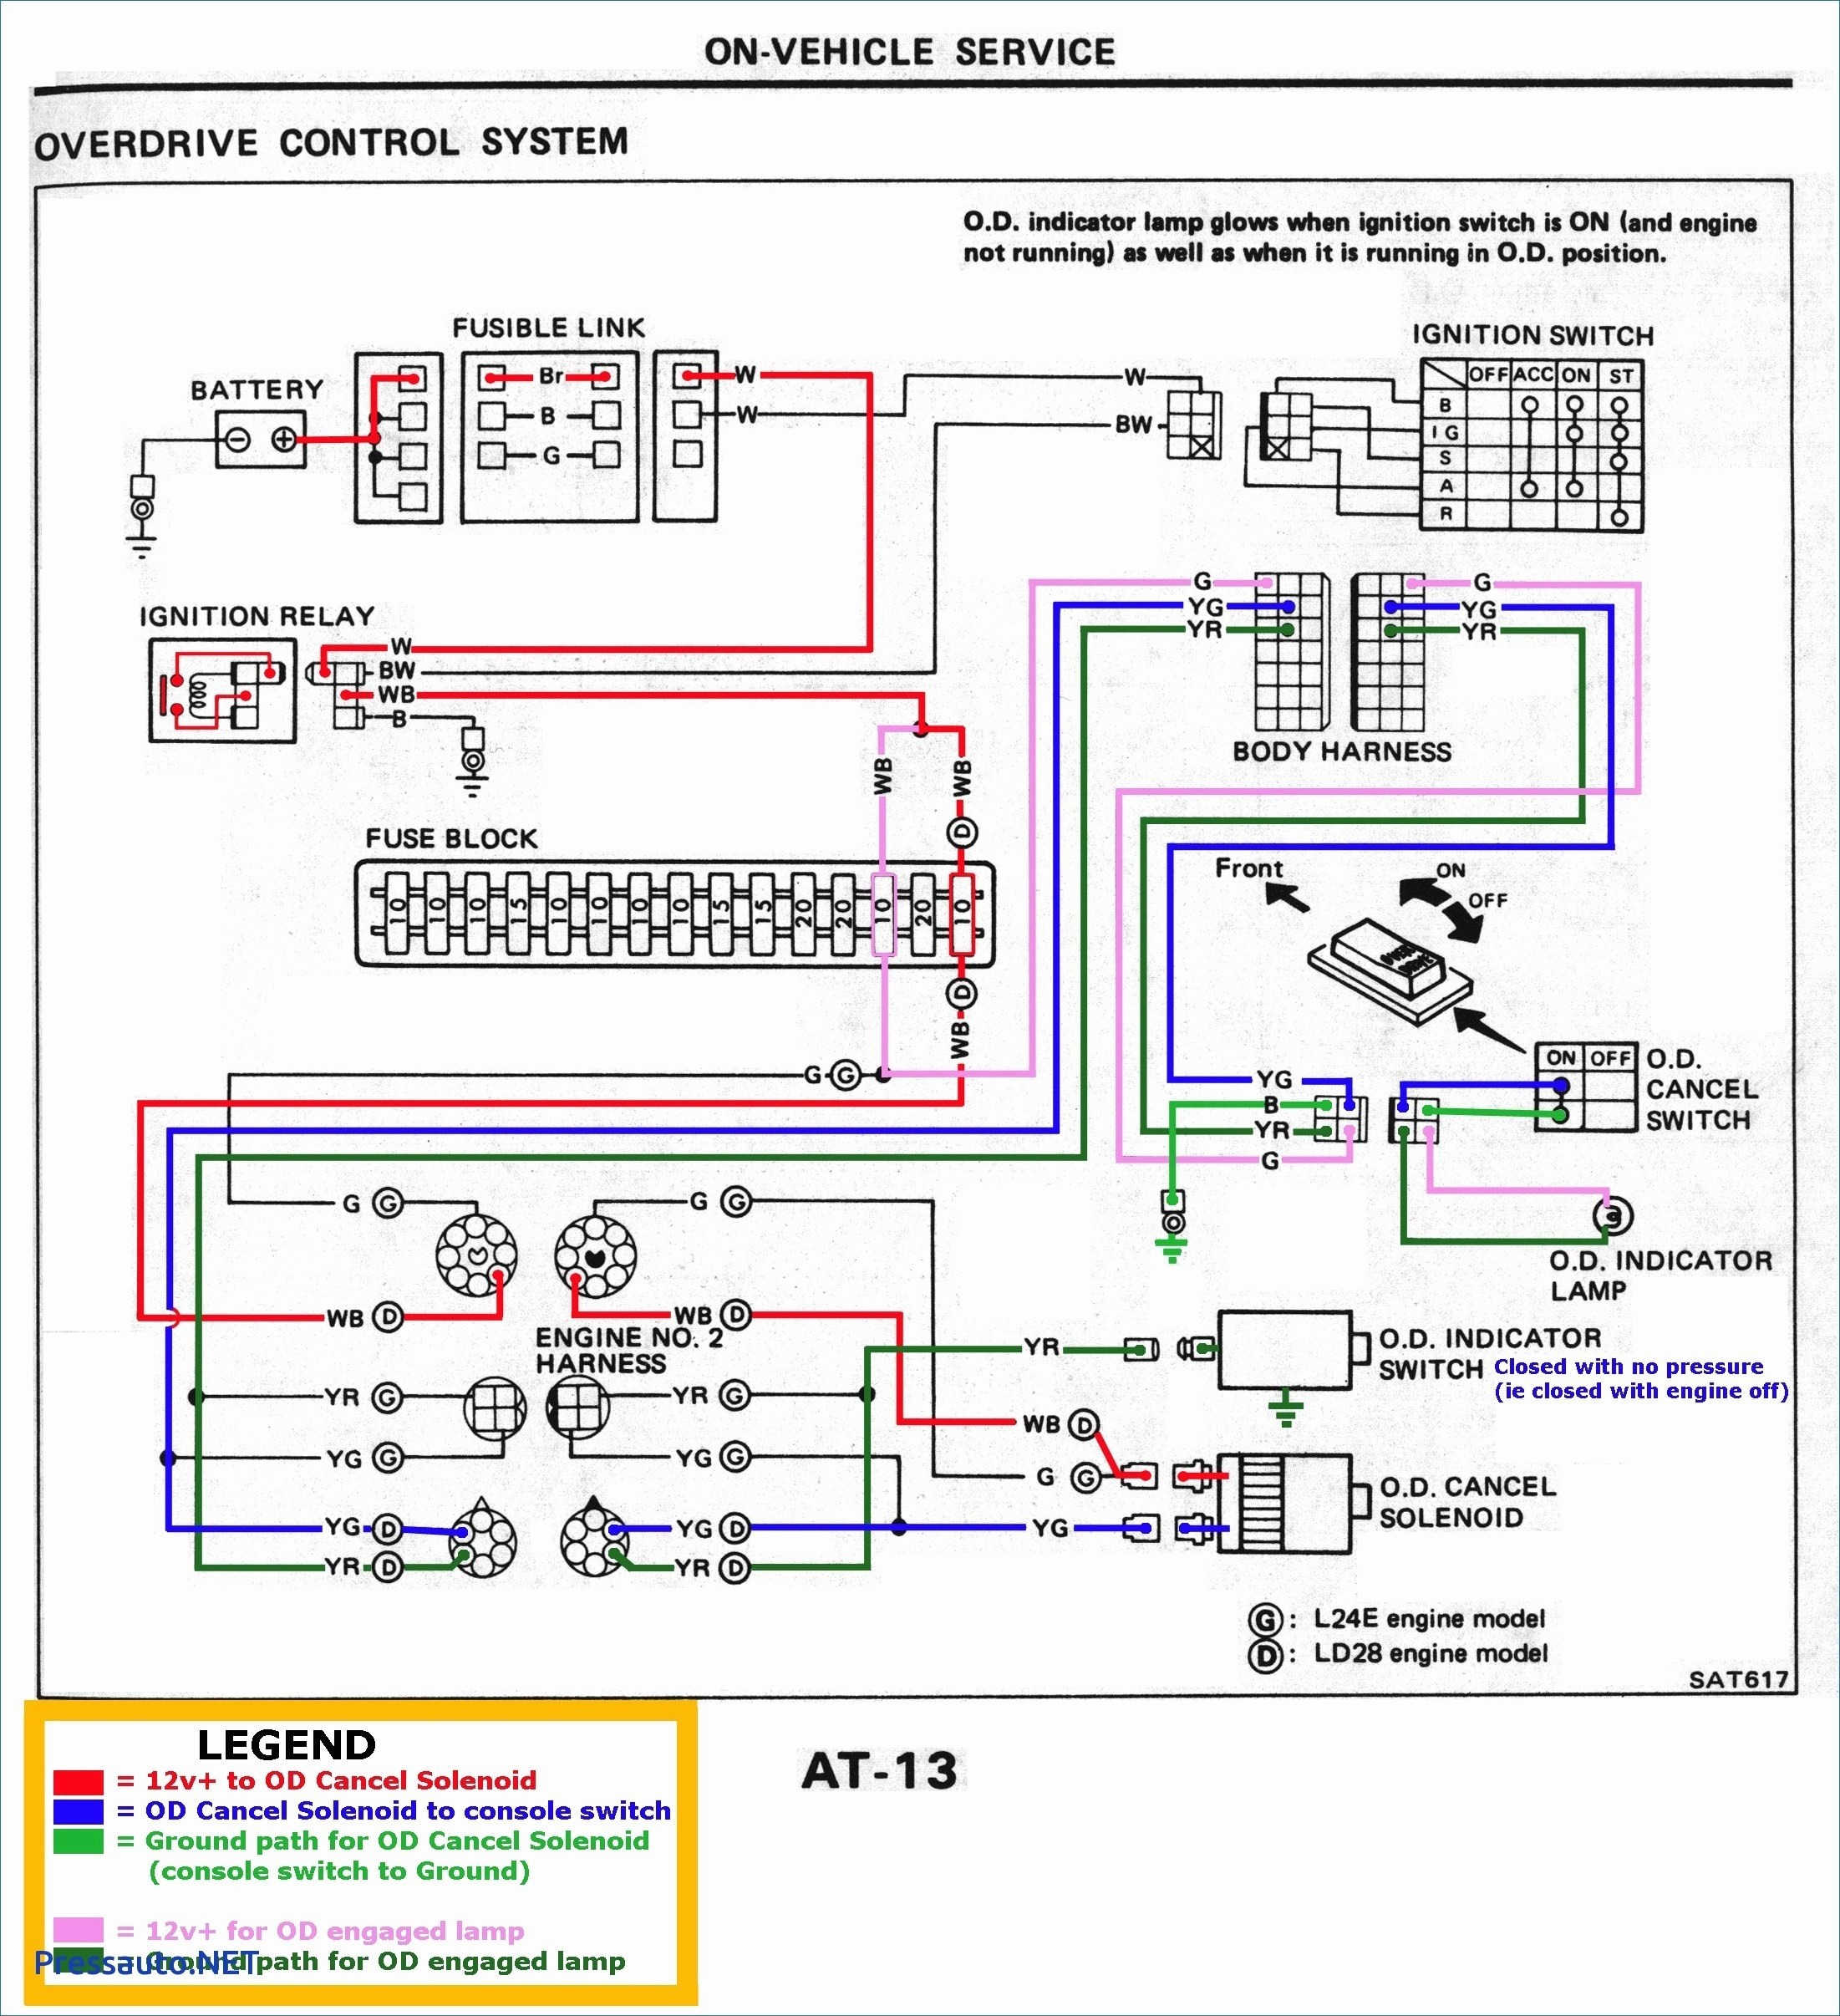 Wiring Diagram for Xbox 360 Power Supply New Wiring Diagram Xbox 360 Power Supply Best Wiring